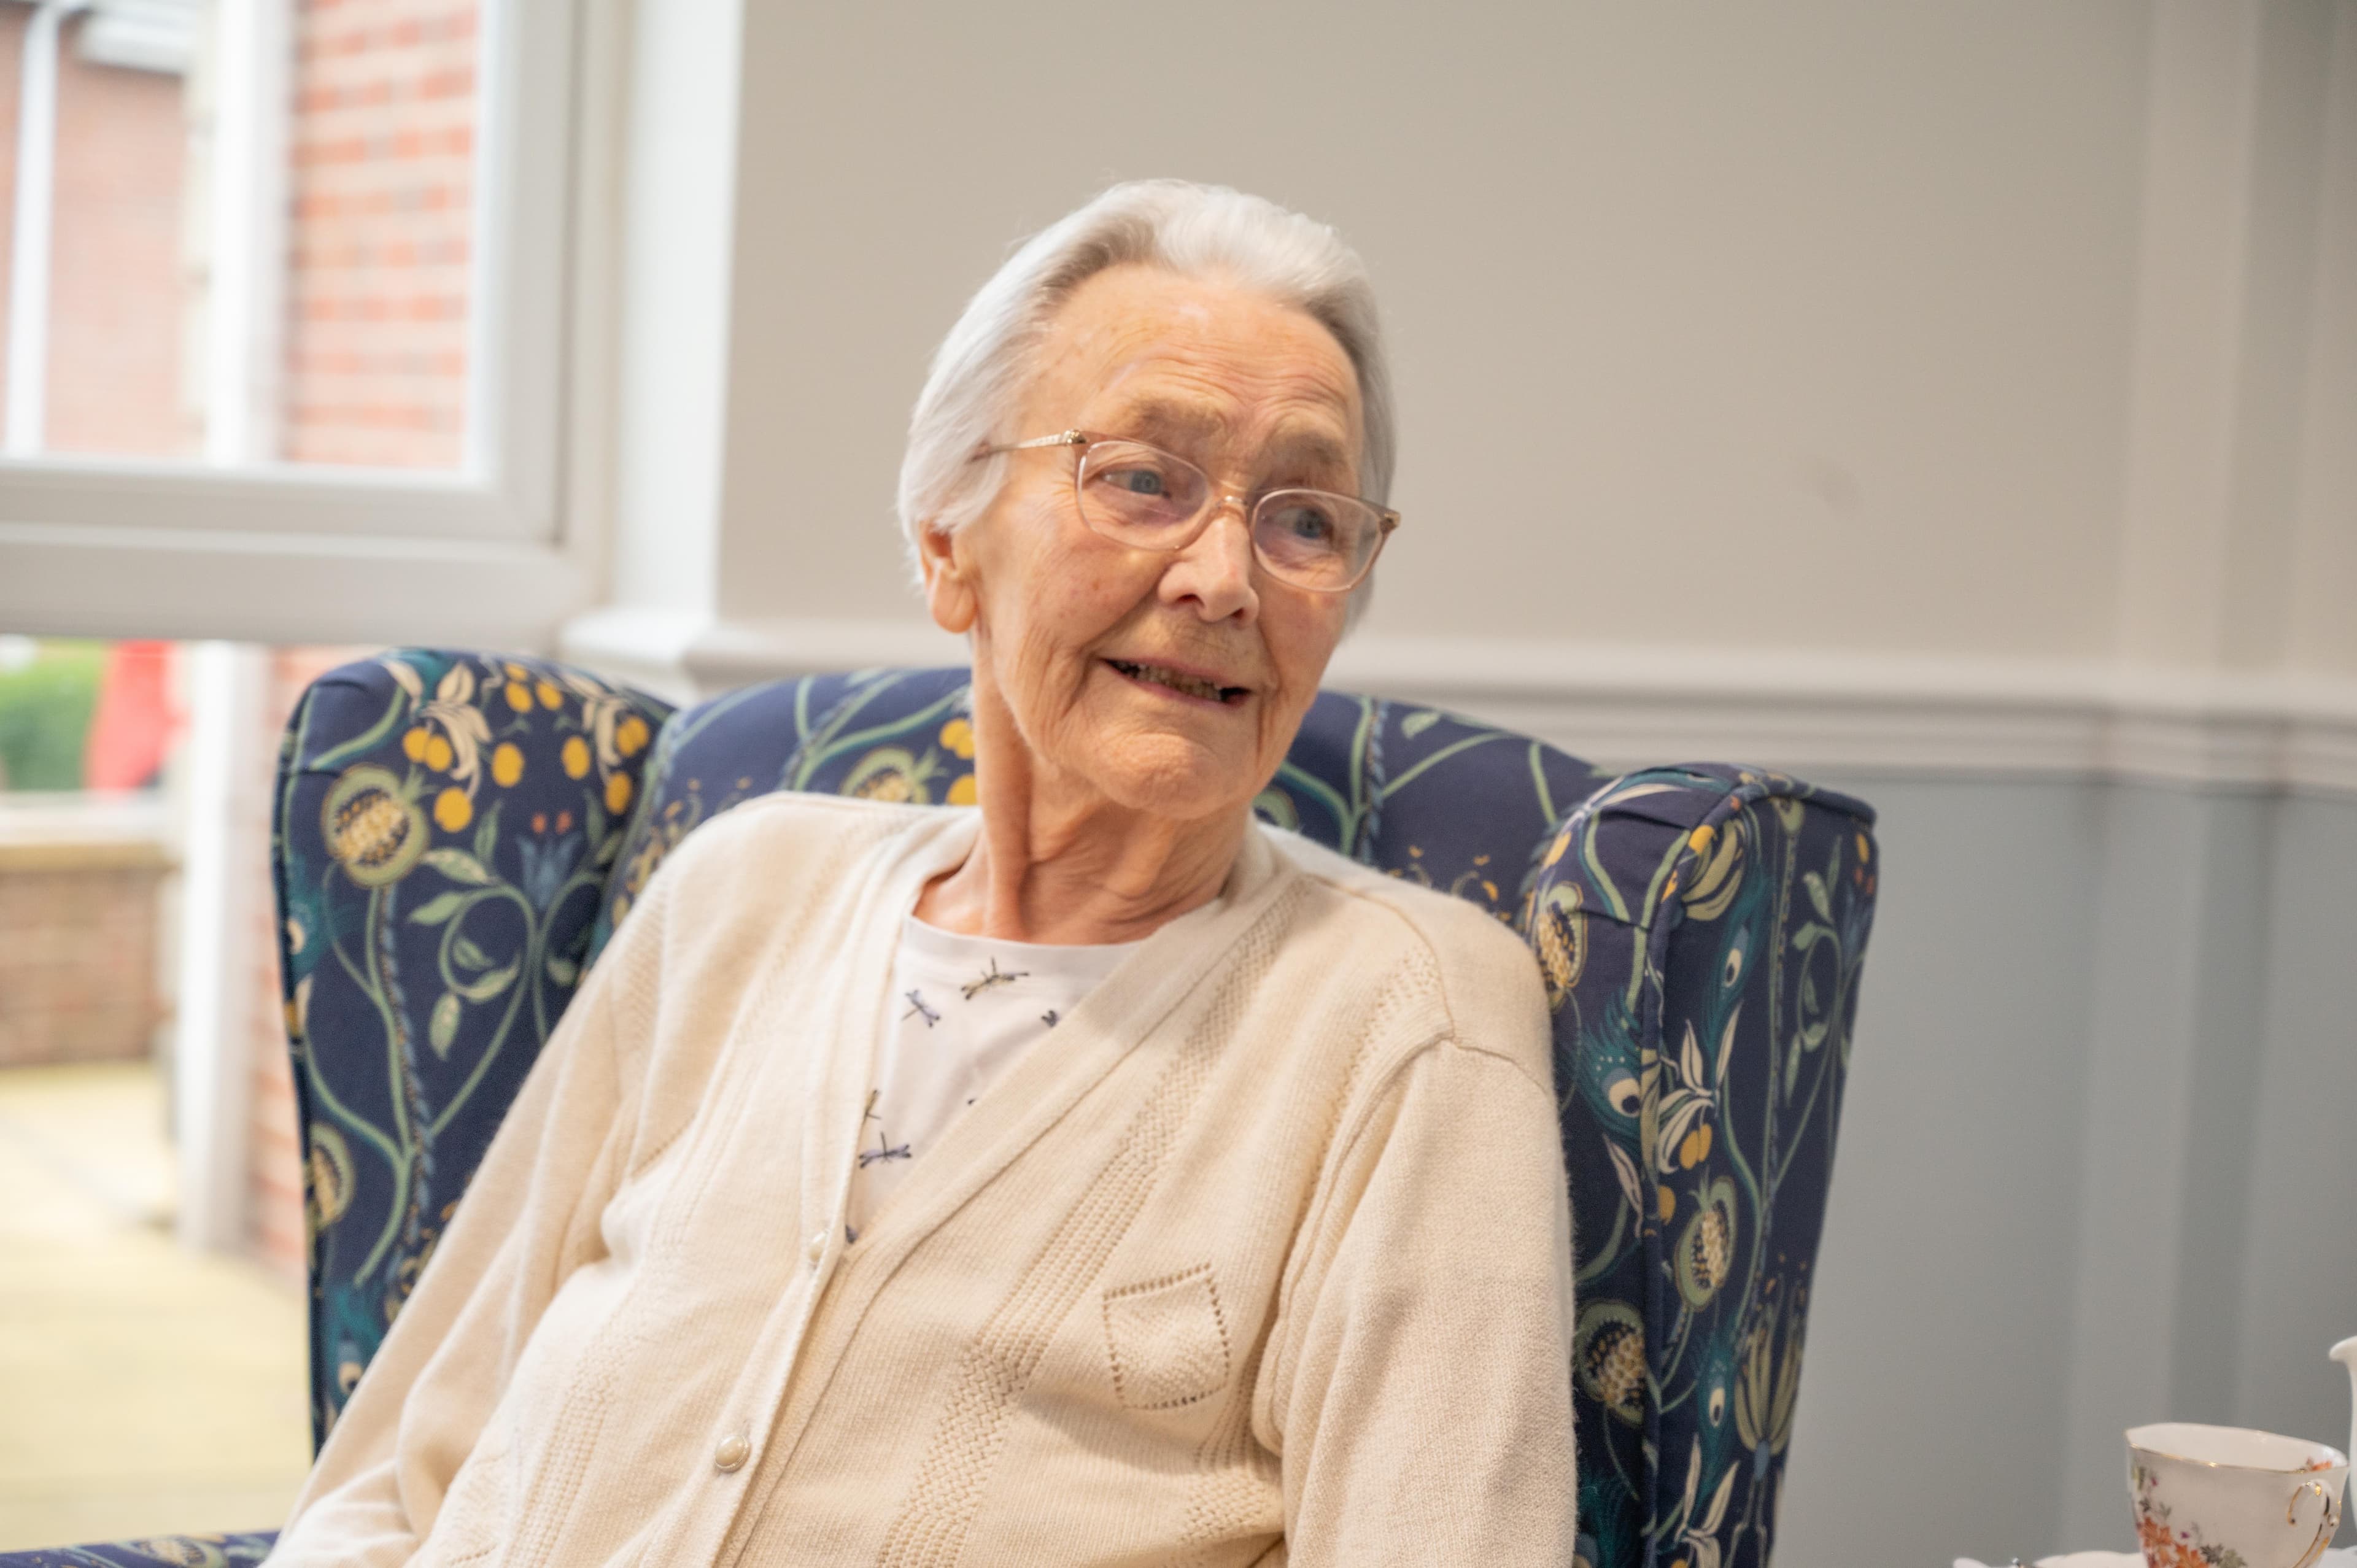 Care home female resident smiling sat in armchair